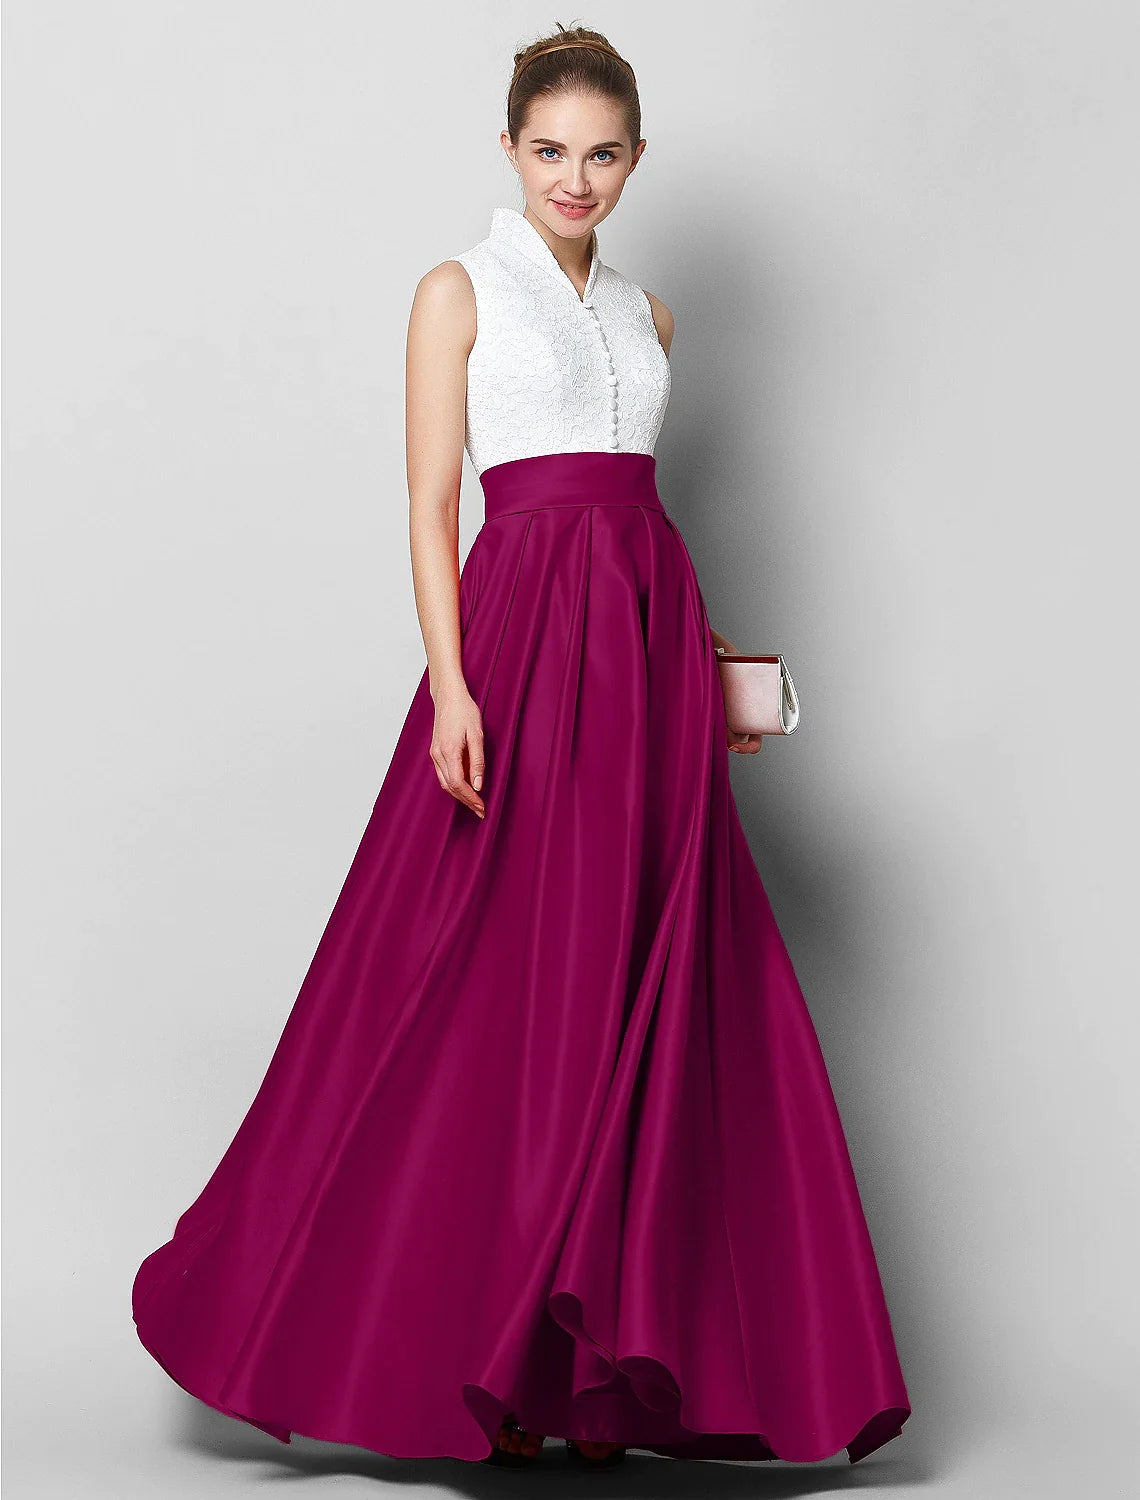 A-Line Elegant & Luxurious Color Block Formal Evening Black Tie Gala Dress High Neck Sleeveless Floor Length Lace with Pleats